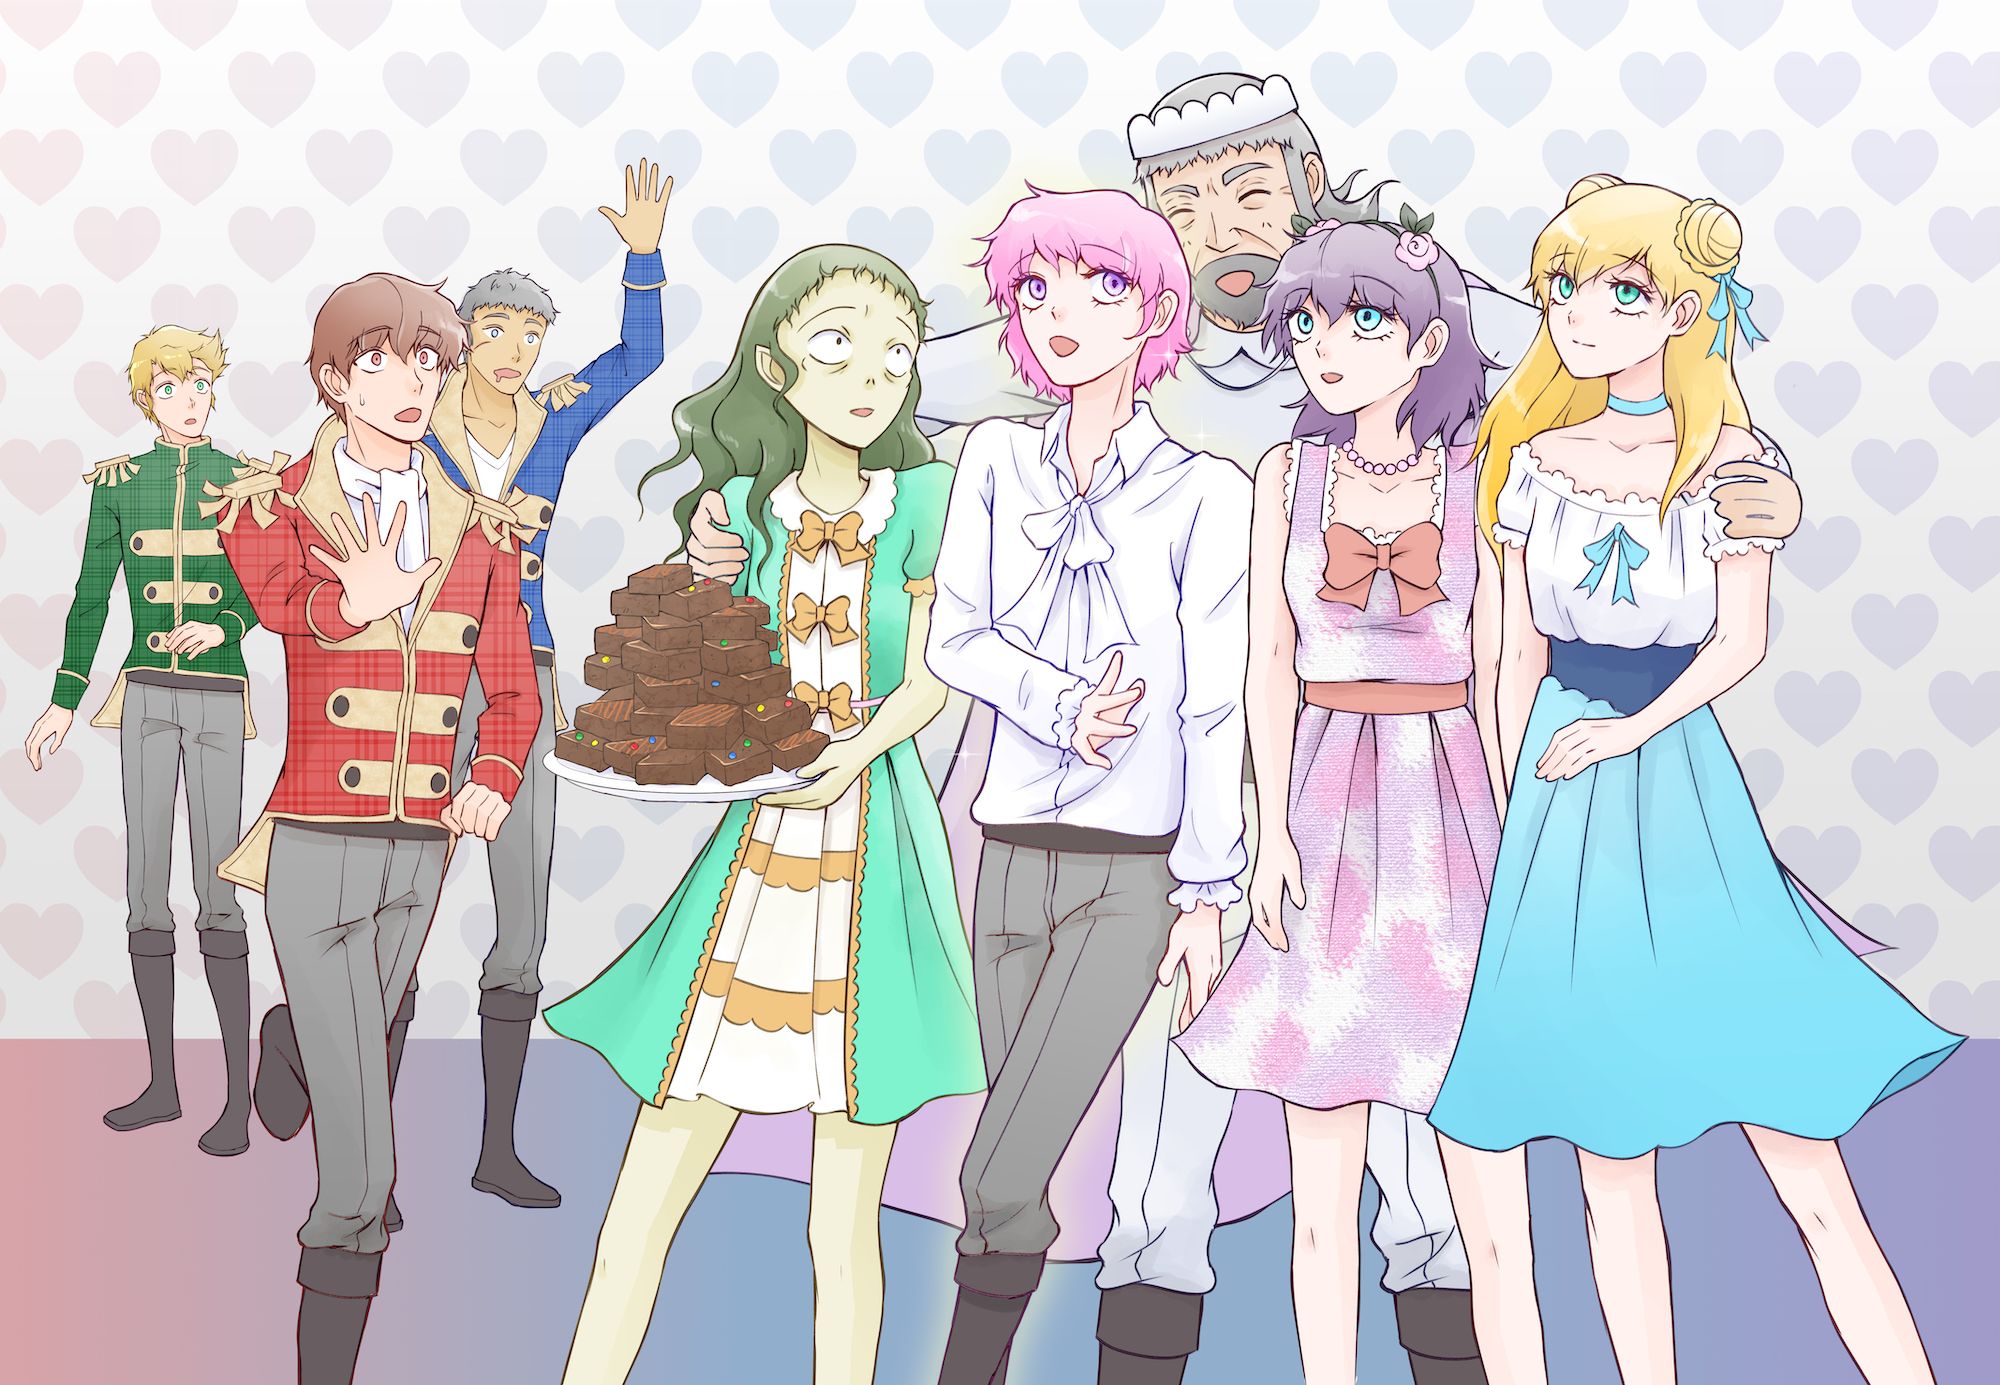 The Pastel royal family enjoy each other's company as the Plaid Princes run to catch up. From left to right: Frederick, Blaine, Lance, Gwen, Jamie, Lorena, Maria (behind: Jack).